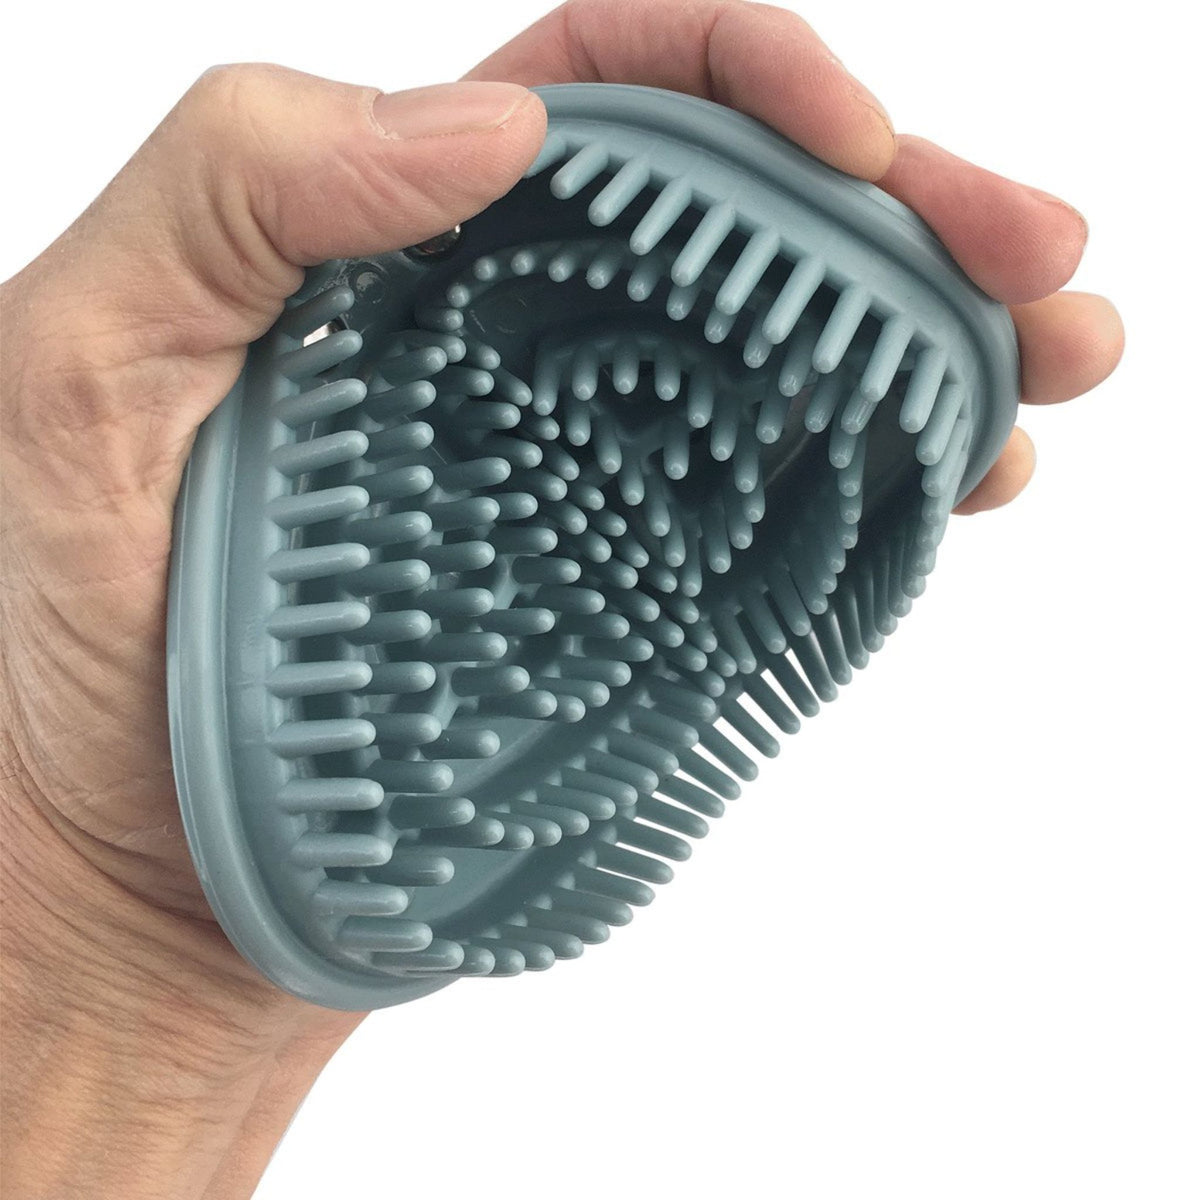 Hand holding light blue rubber curry comb in flexed position.